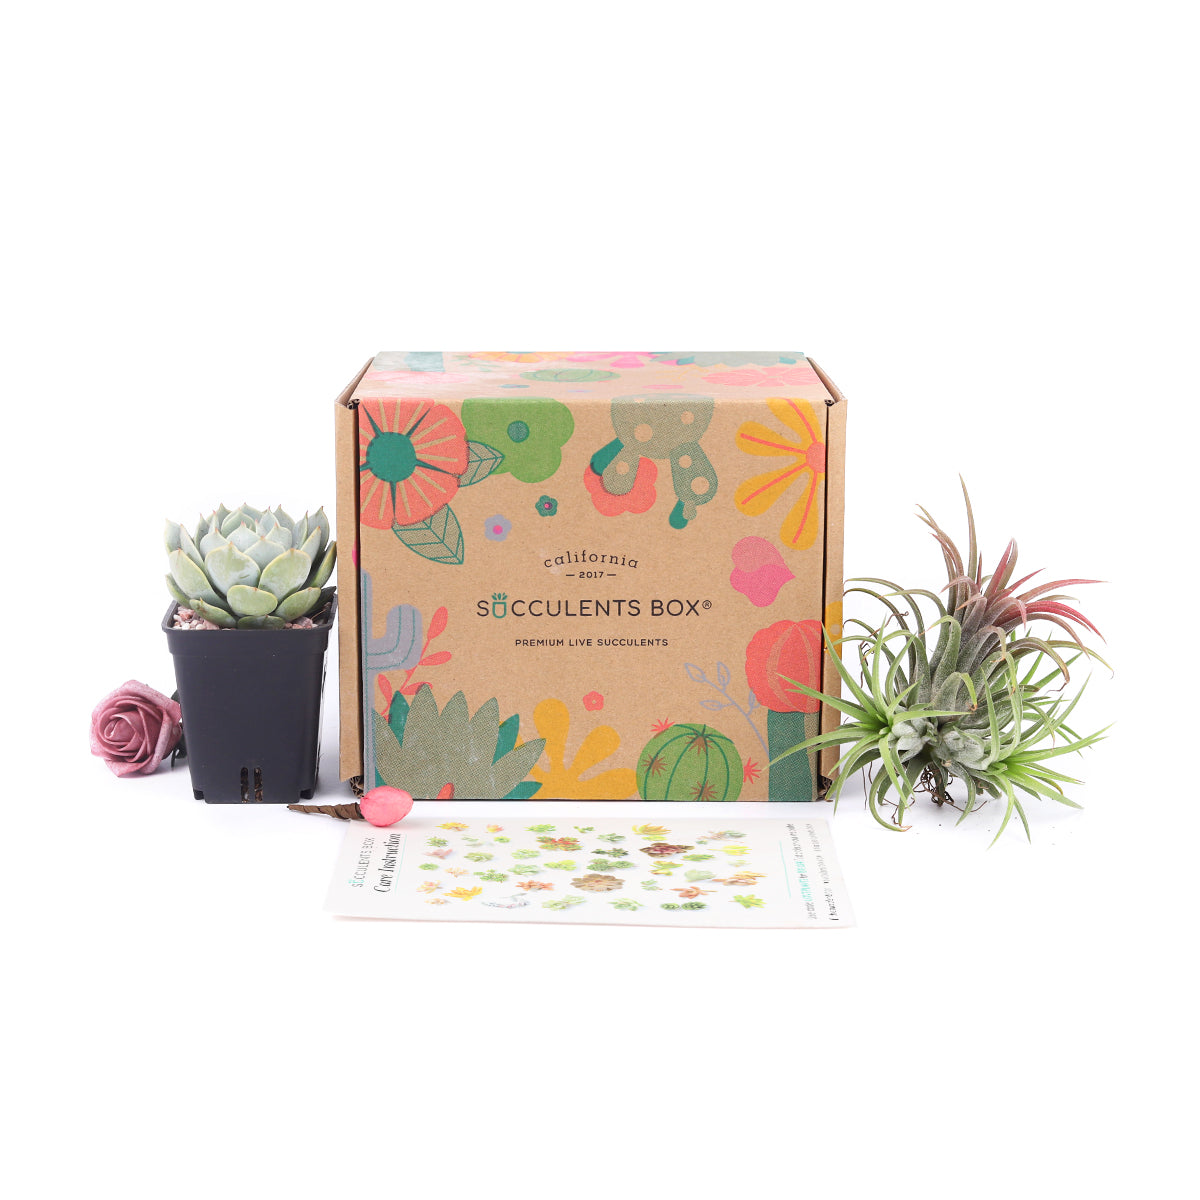 mother day gifts, mother's day subscription box, subscription boxes for mother's day, best subscription boxes for mother's day, Succulent subscription box delivered monthly, Succulent subscription gift for sale, airplants subscription box monthly